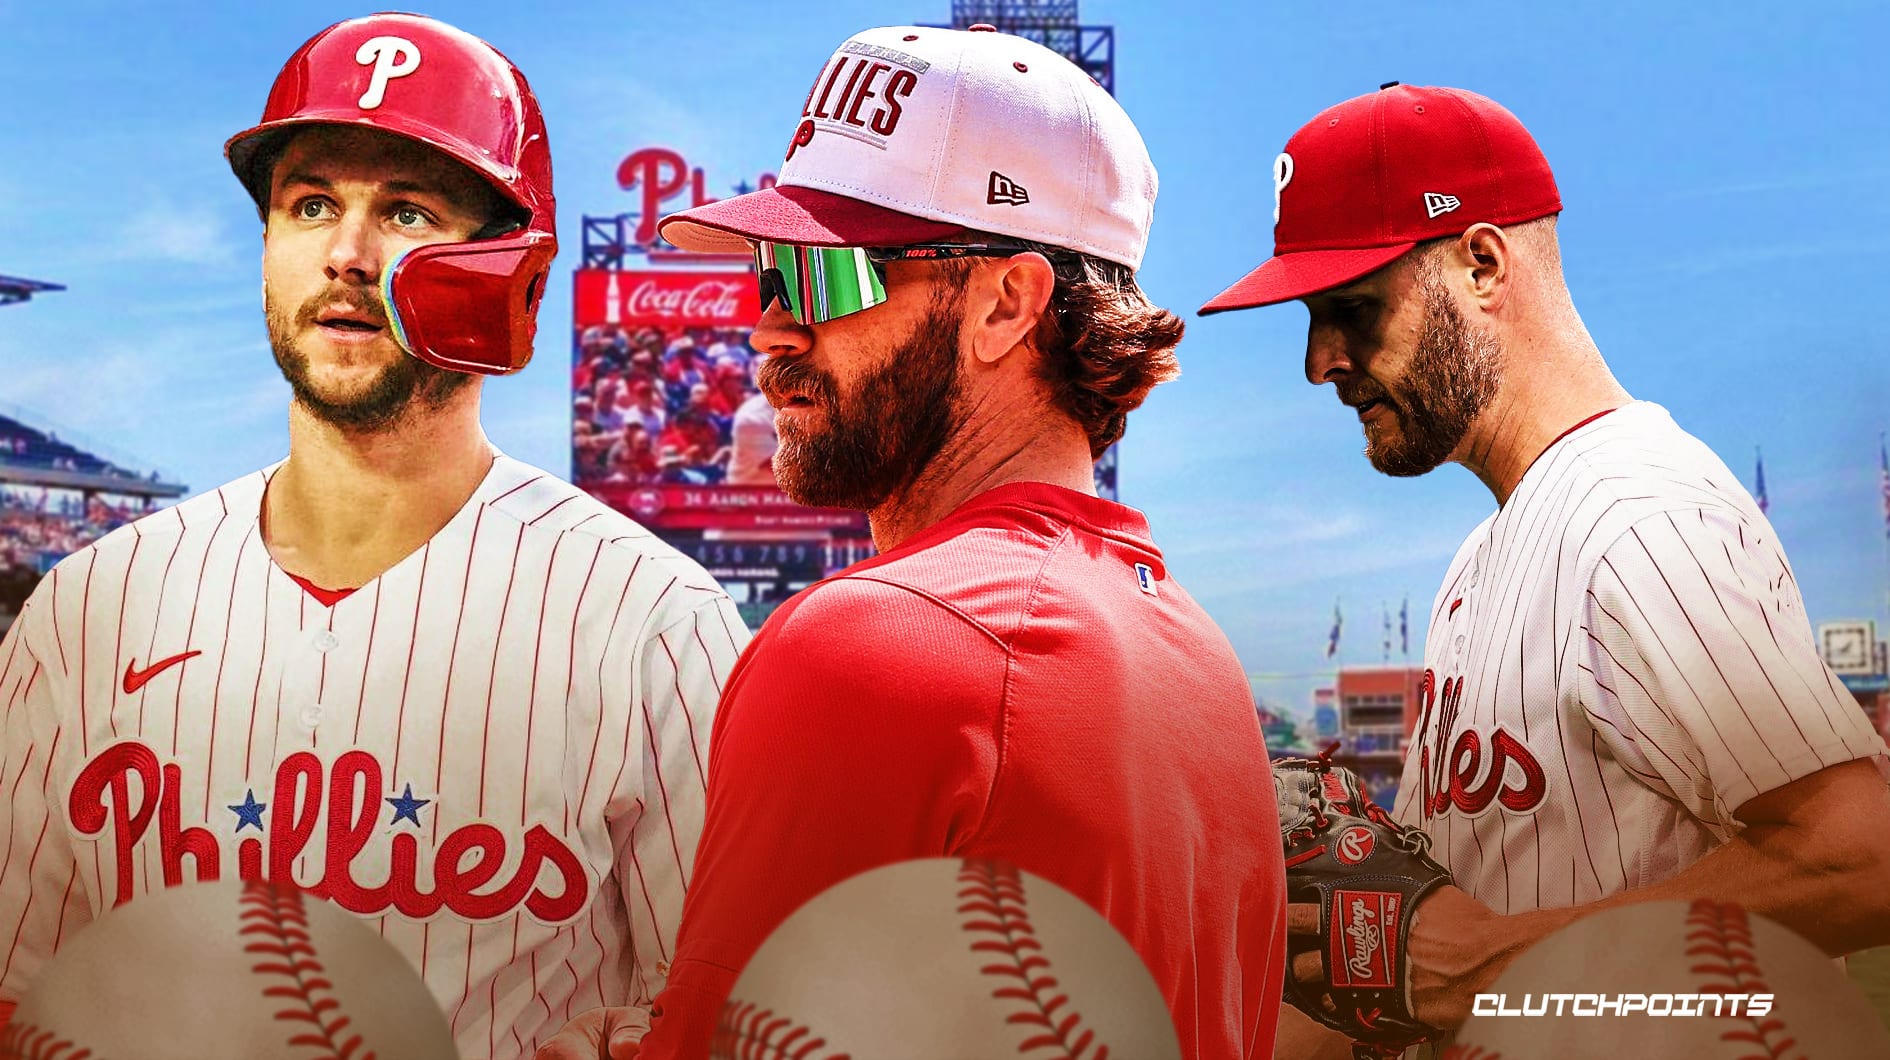 Shops selling the coolest Bryce Harper and Philadelphia Phillies T